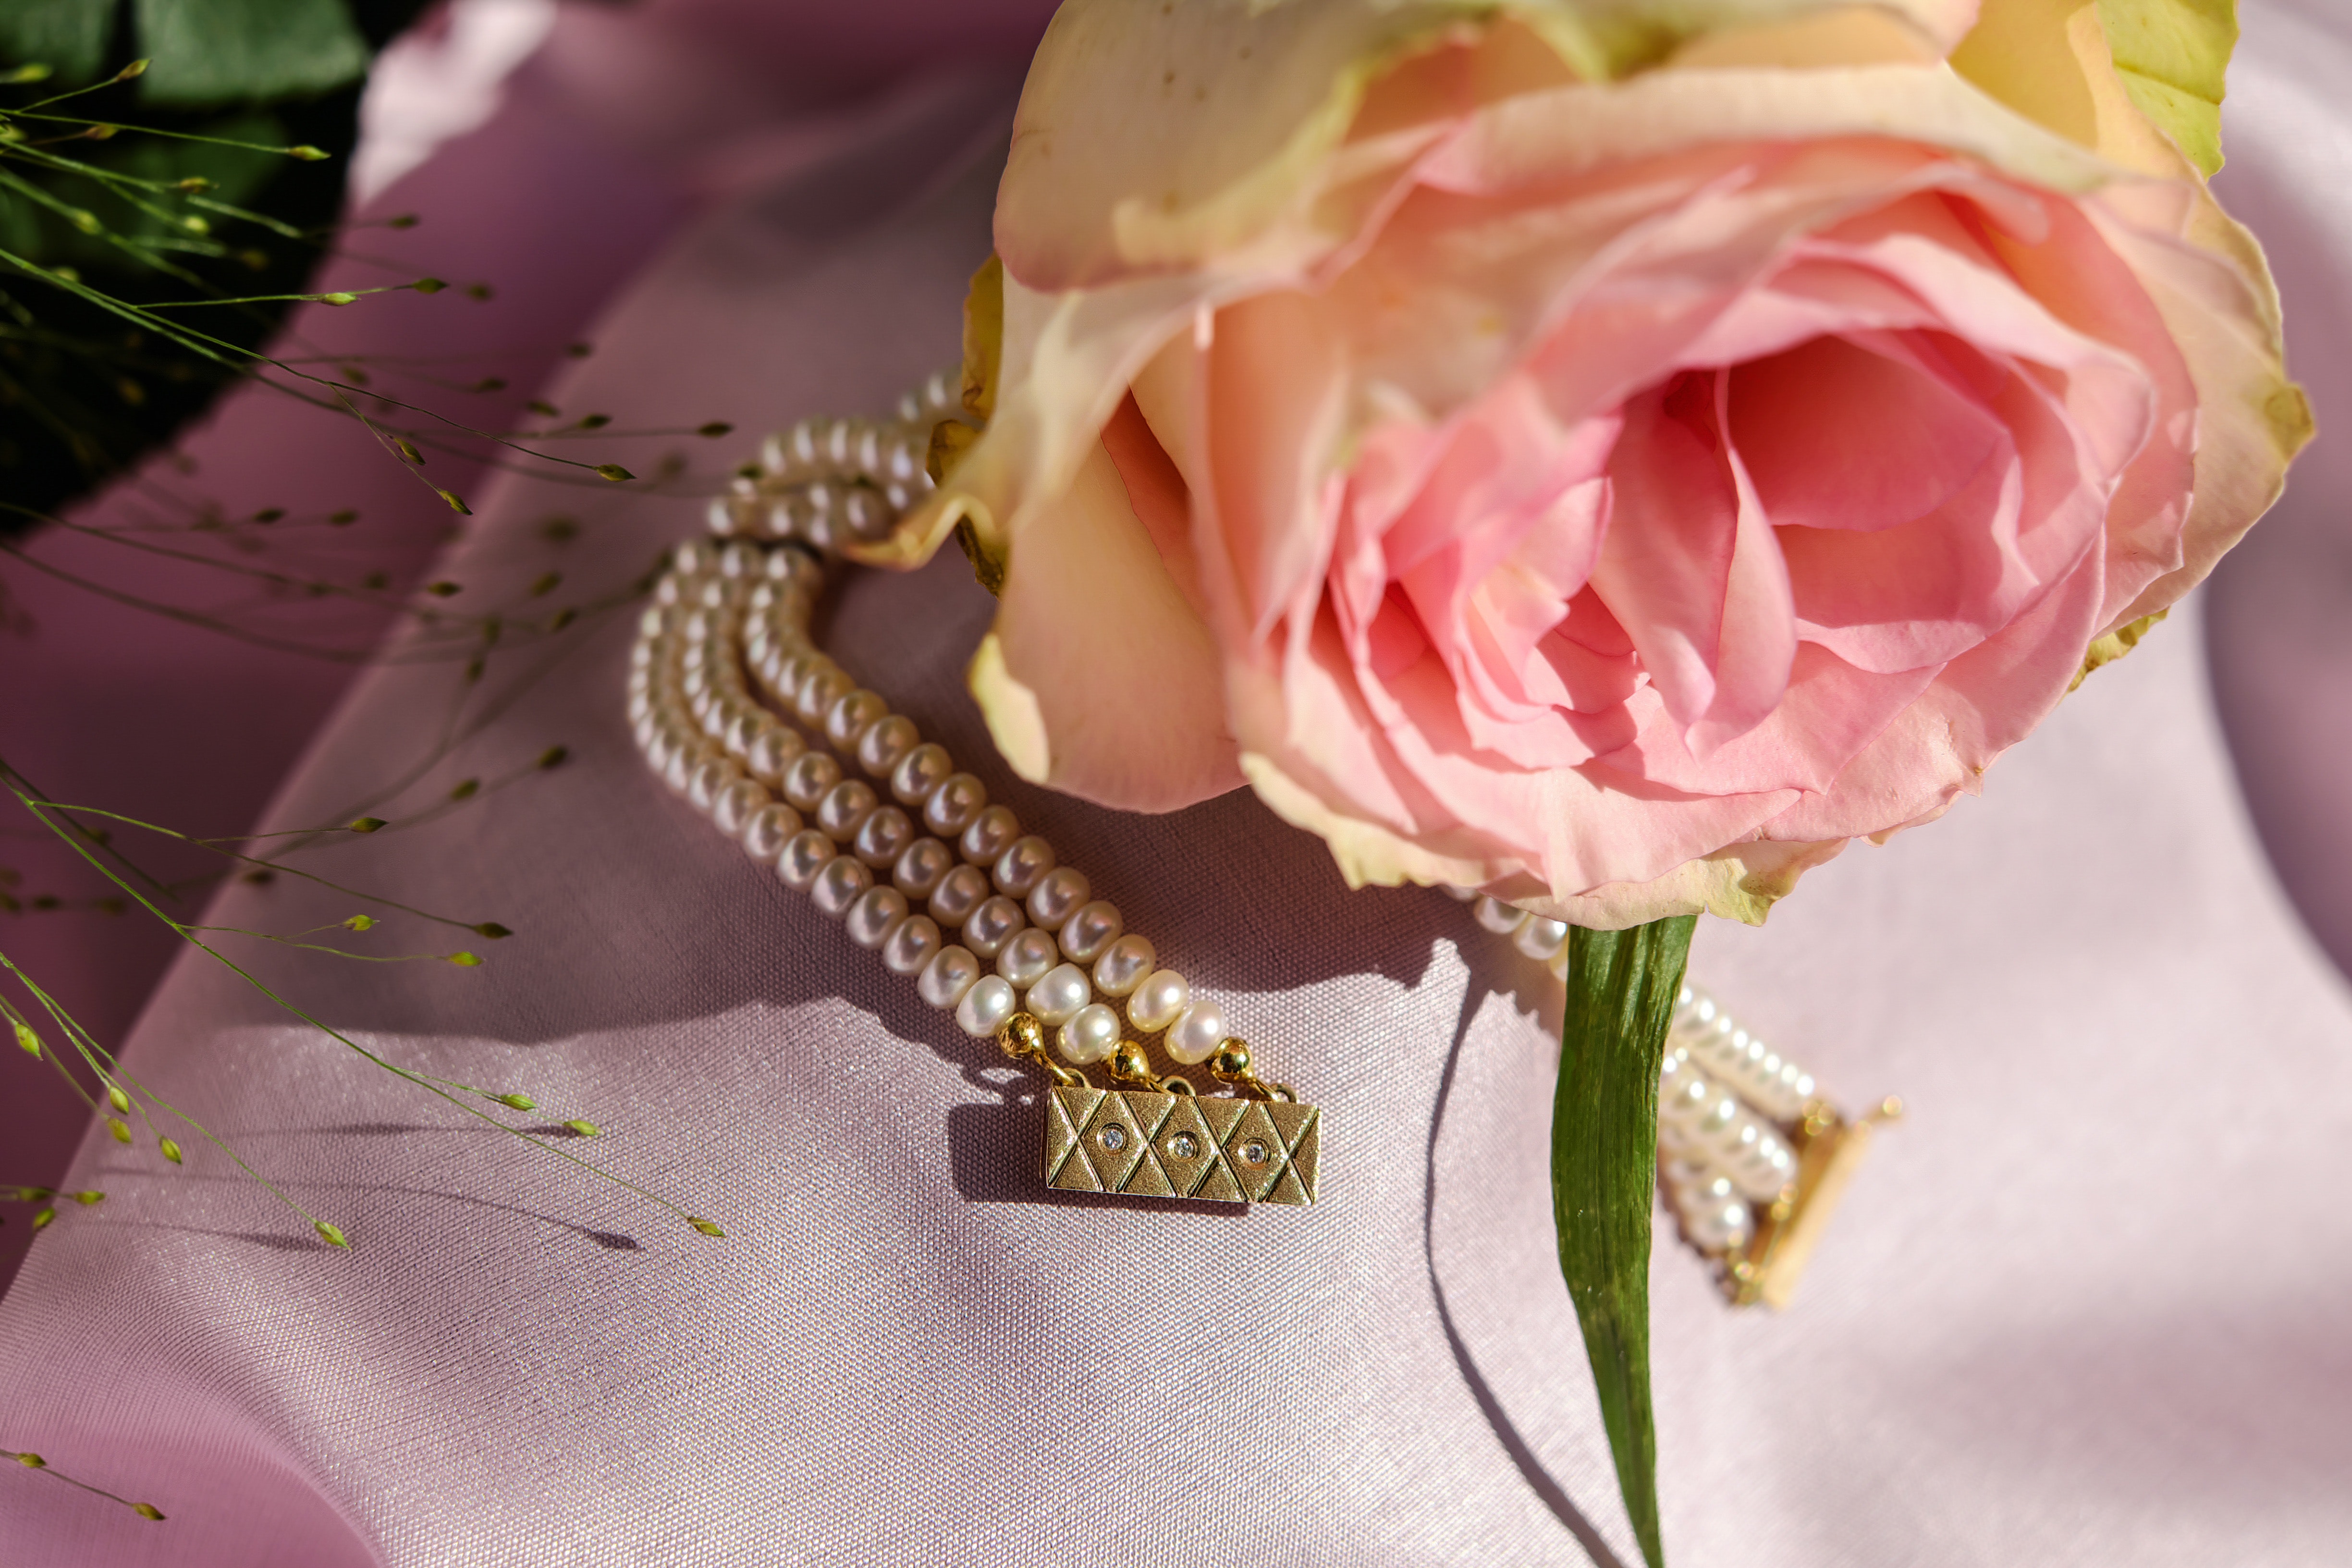 Free photo: Pink Rose and Gold Beaded Jewelry - Affection, Flower, Rose ...